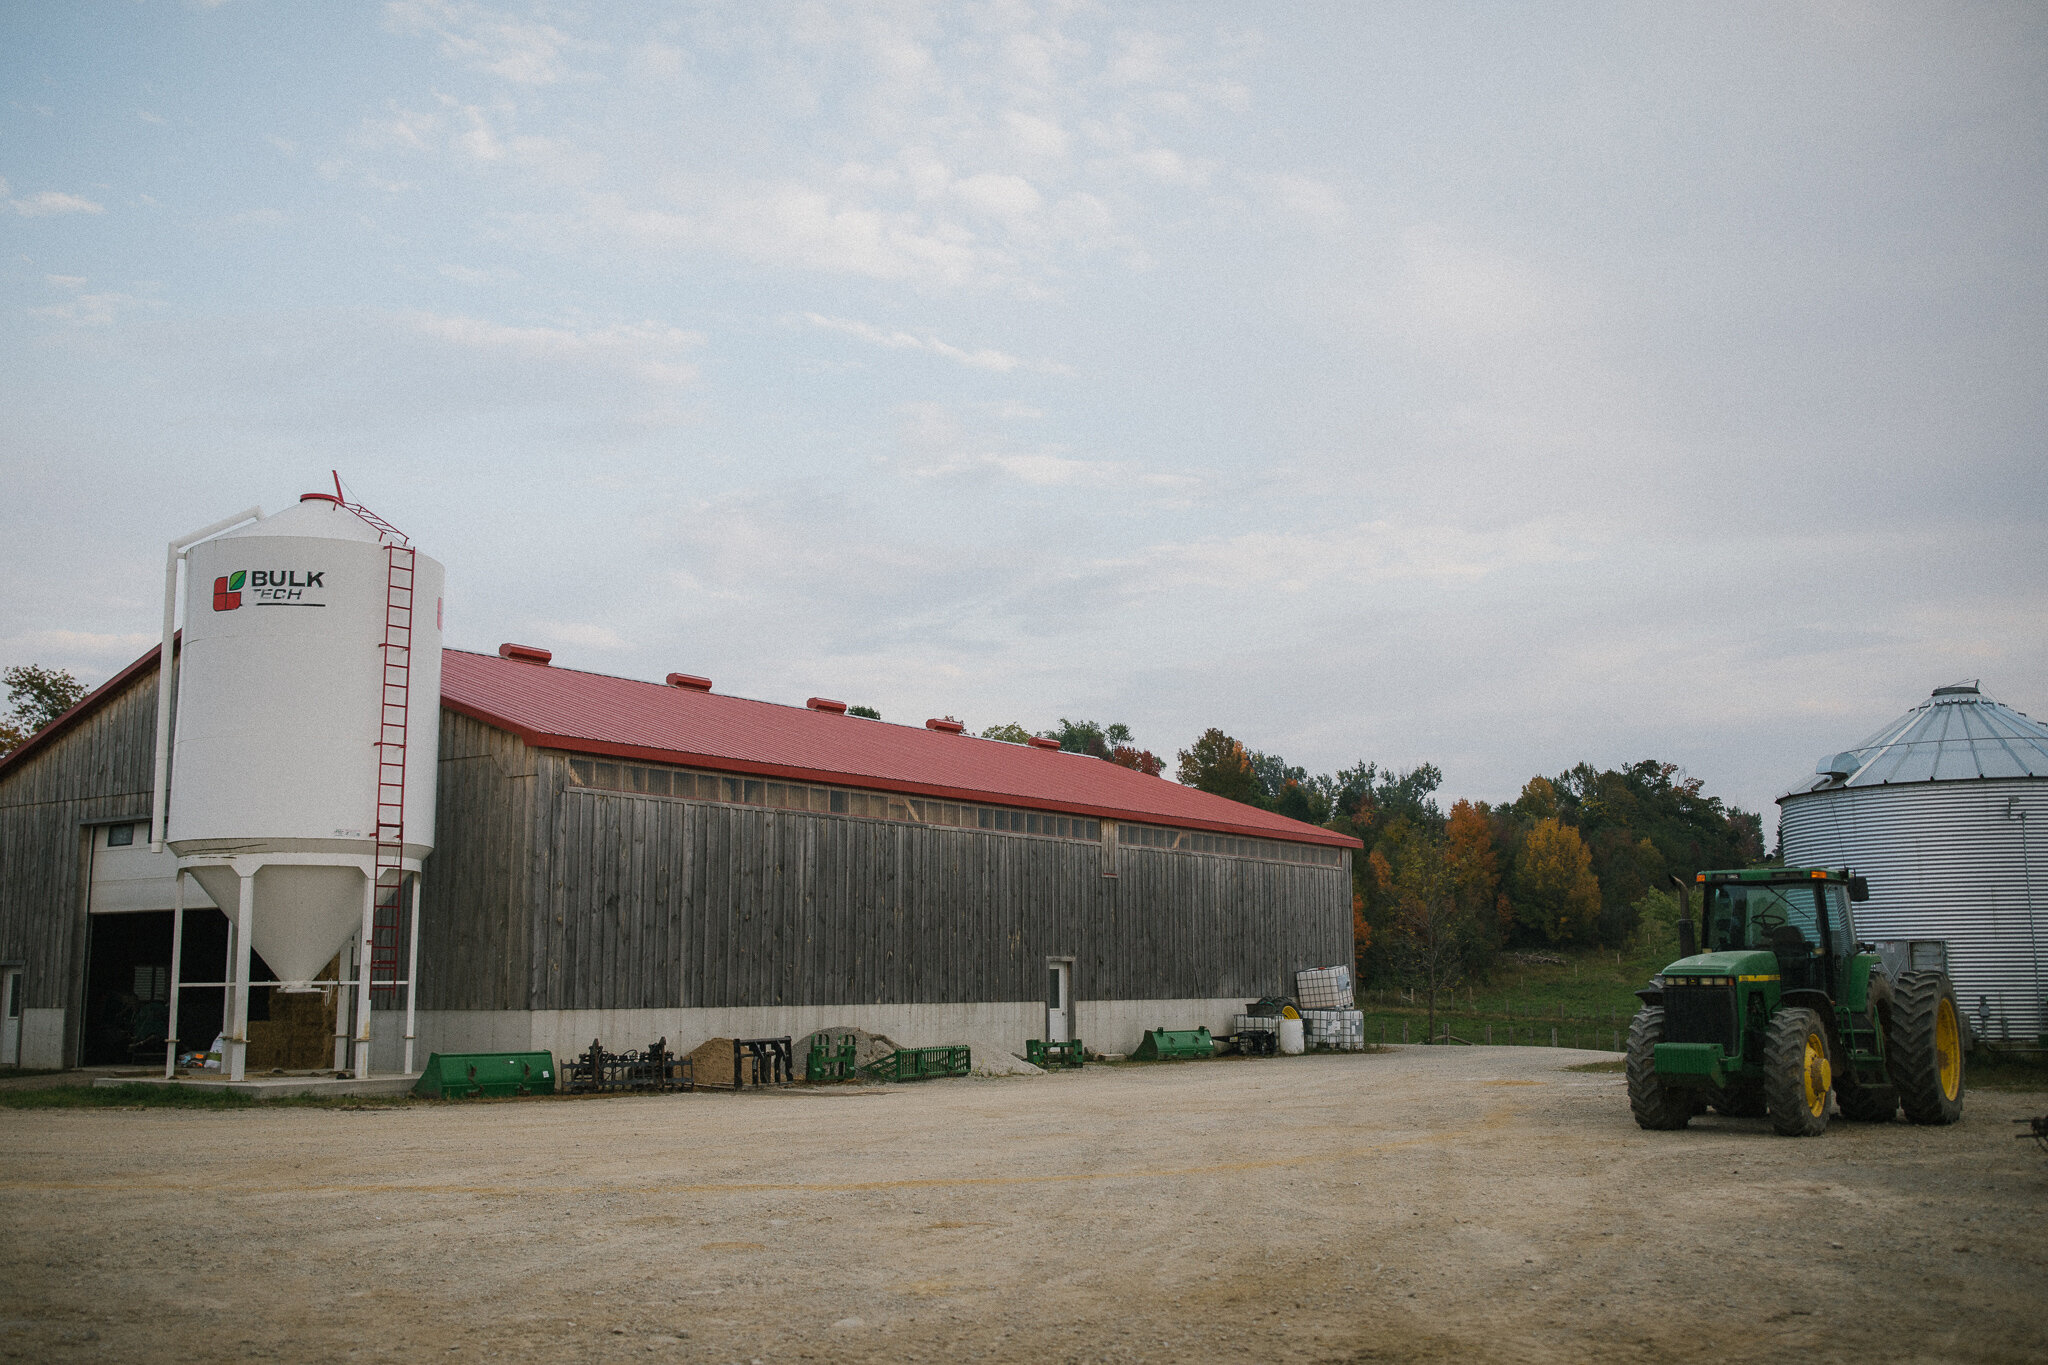 Farm to table dinner at good family farms created by Sumac and S